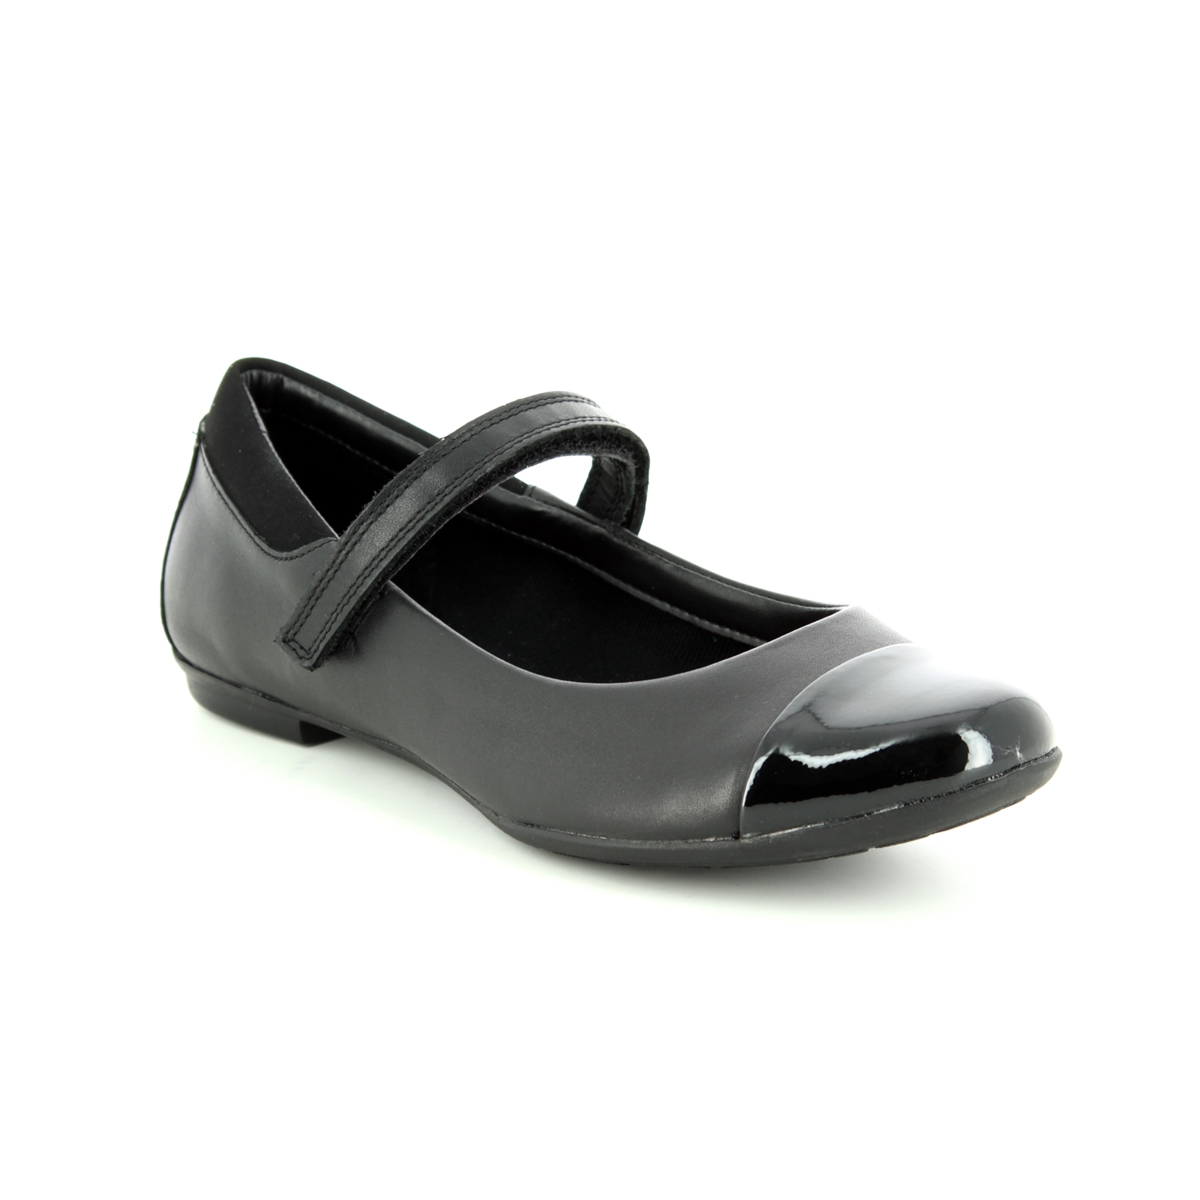 clarks ladies shoes new in